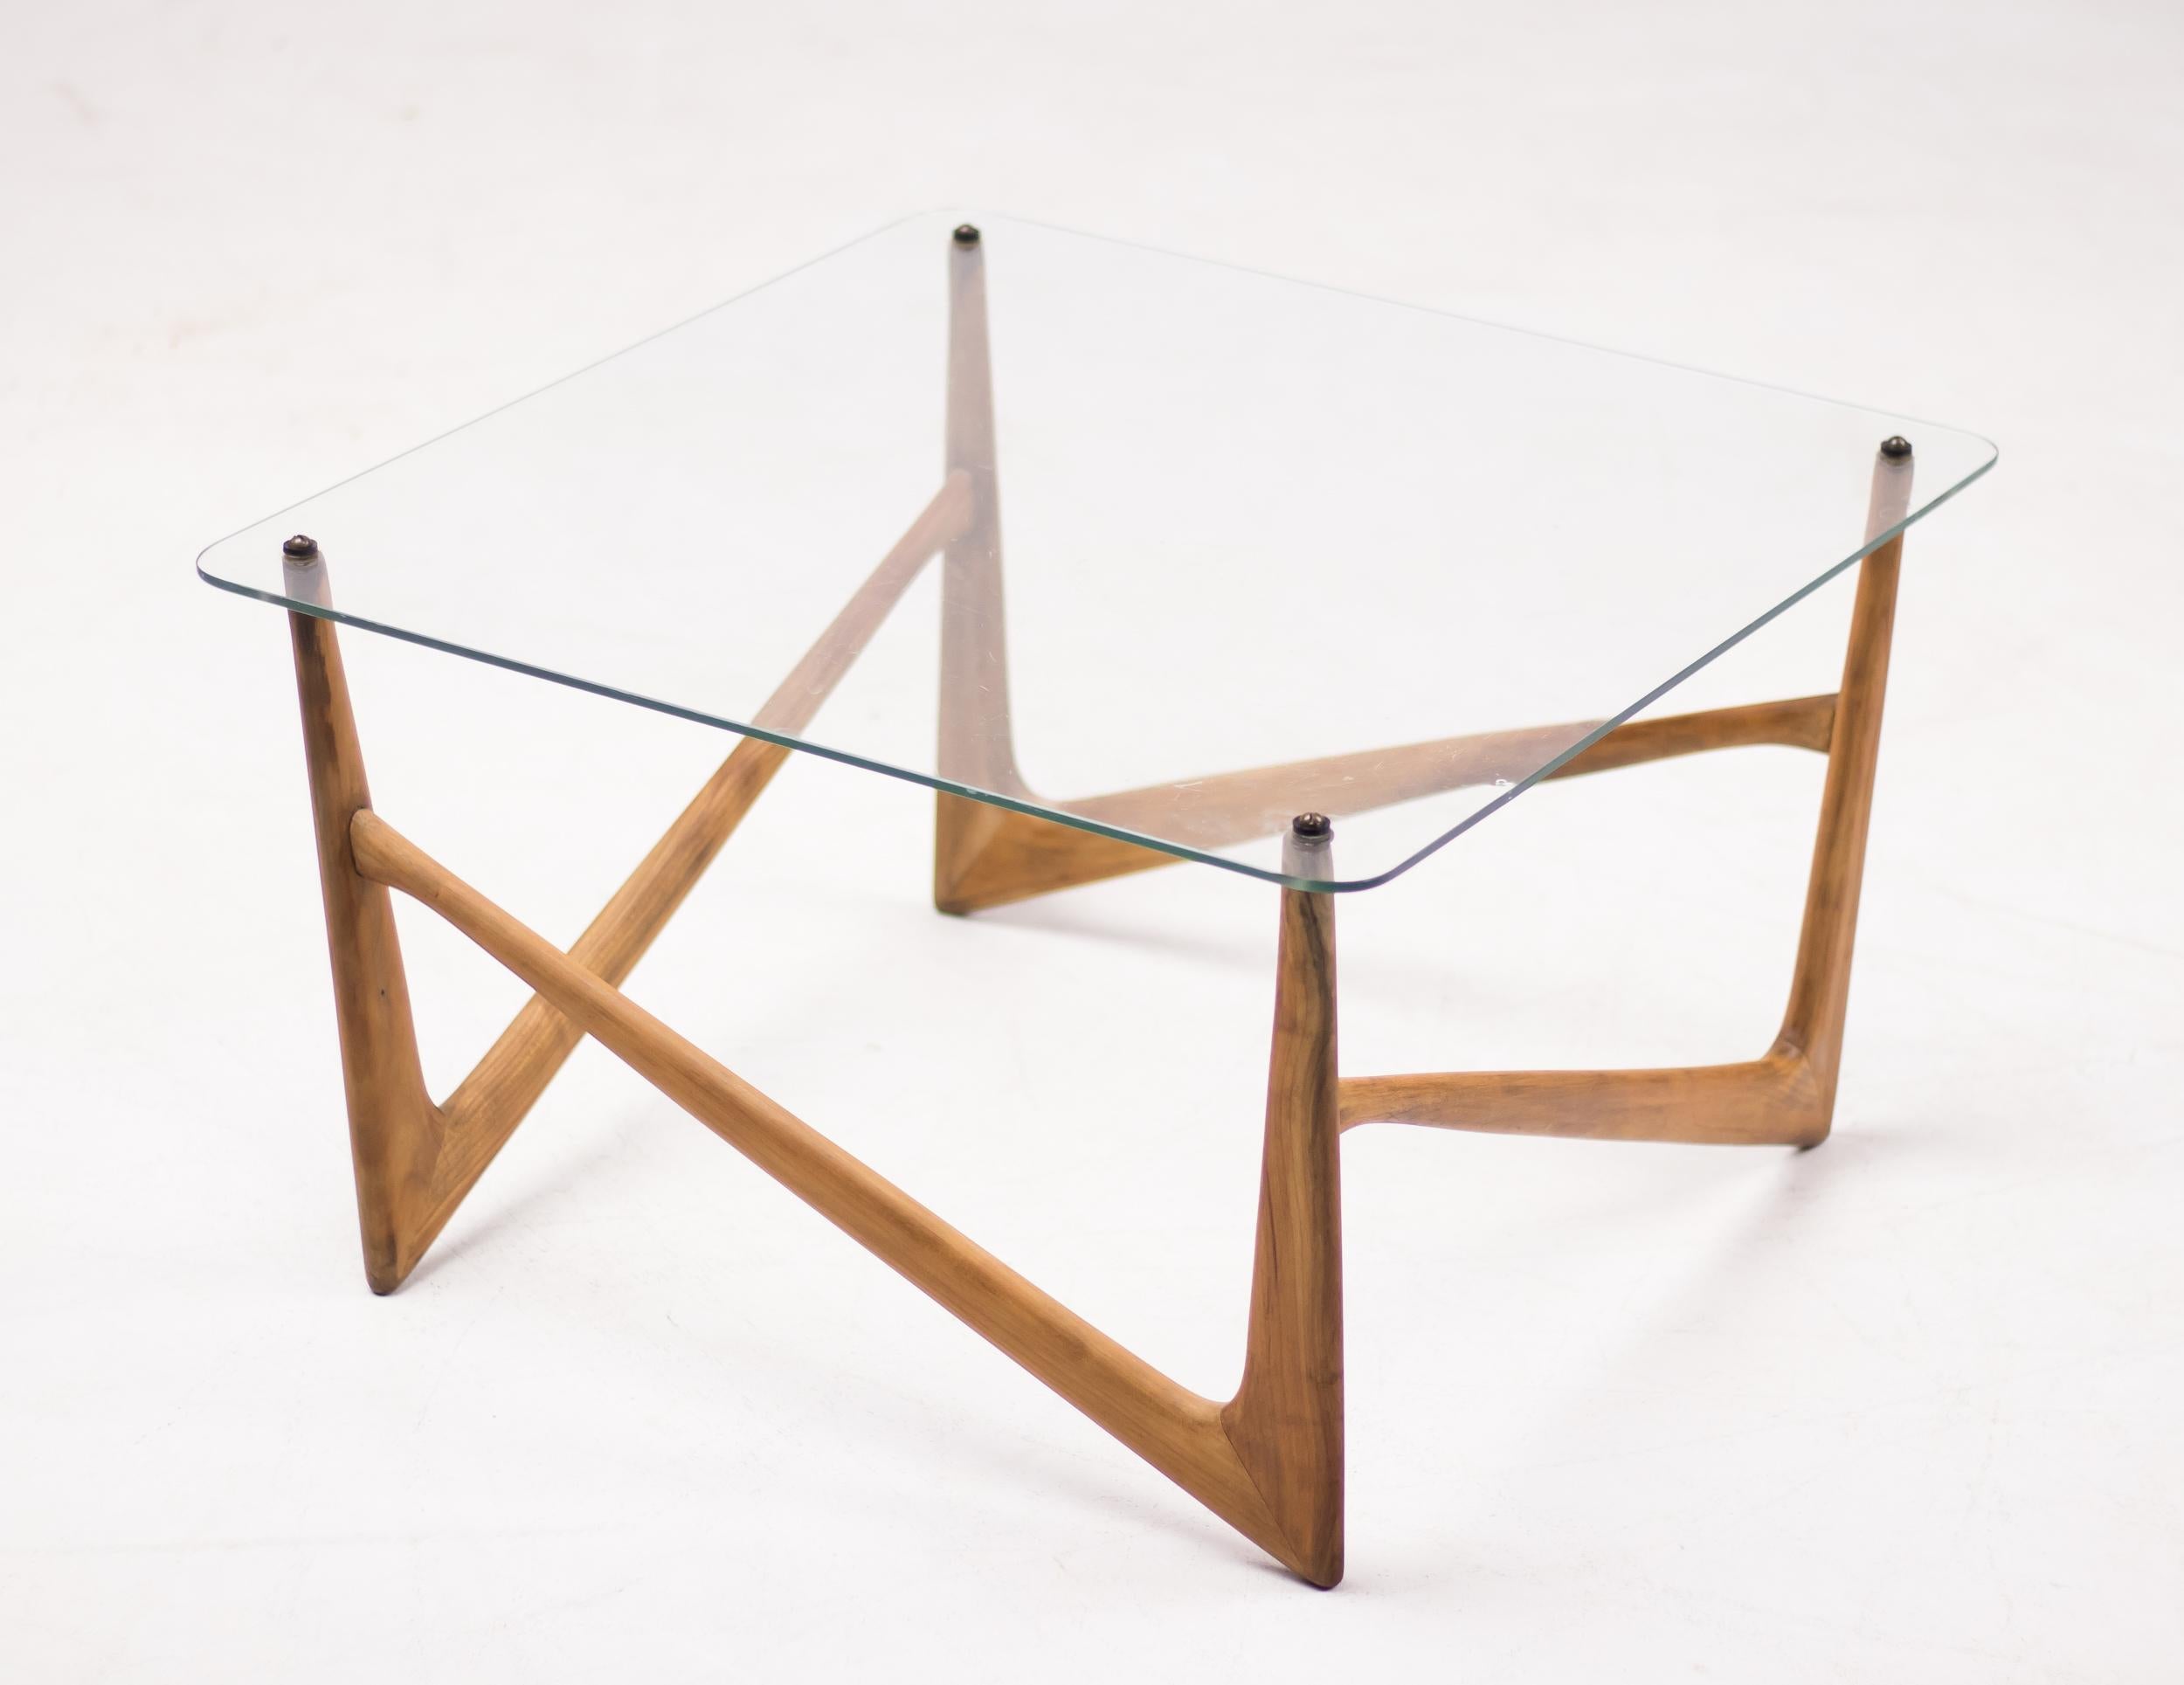 Elegant Italian Mid-Century Modern coffee table with a carved solid walnut base and crystal glass top.
The sculptural quality of this beautiful table resembles the organic designs of Carlo Mollino, Isamu Noguchi and Eero Saarinen.
The bone-like